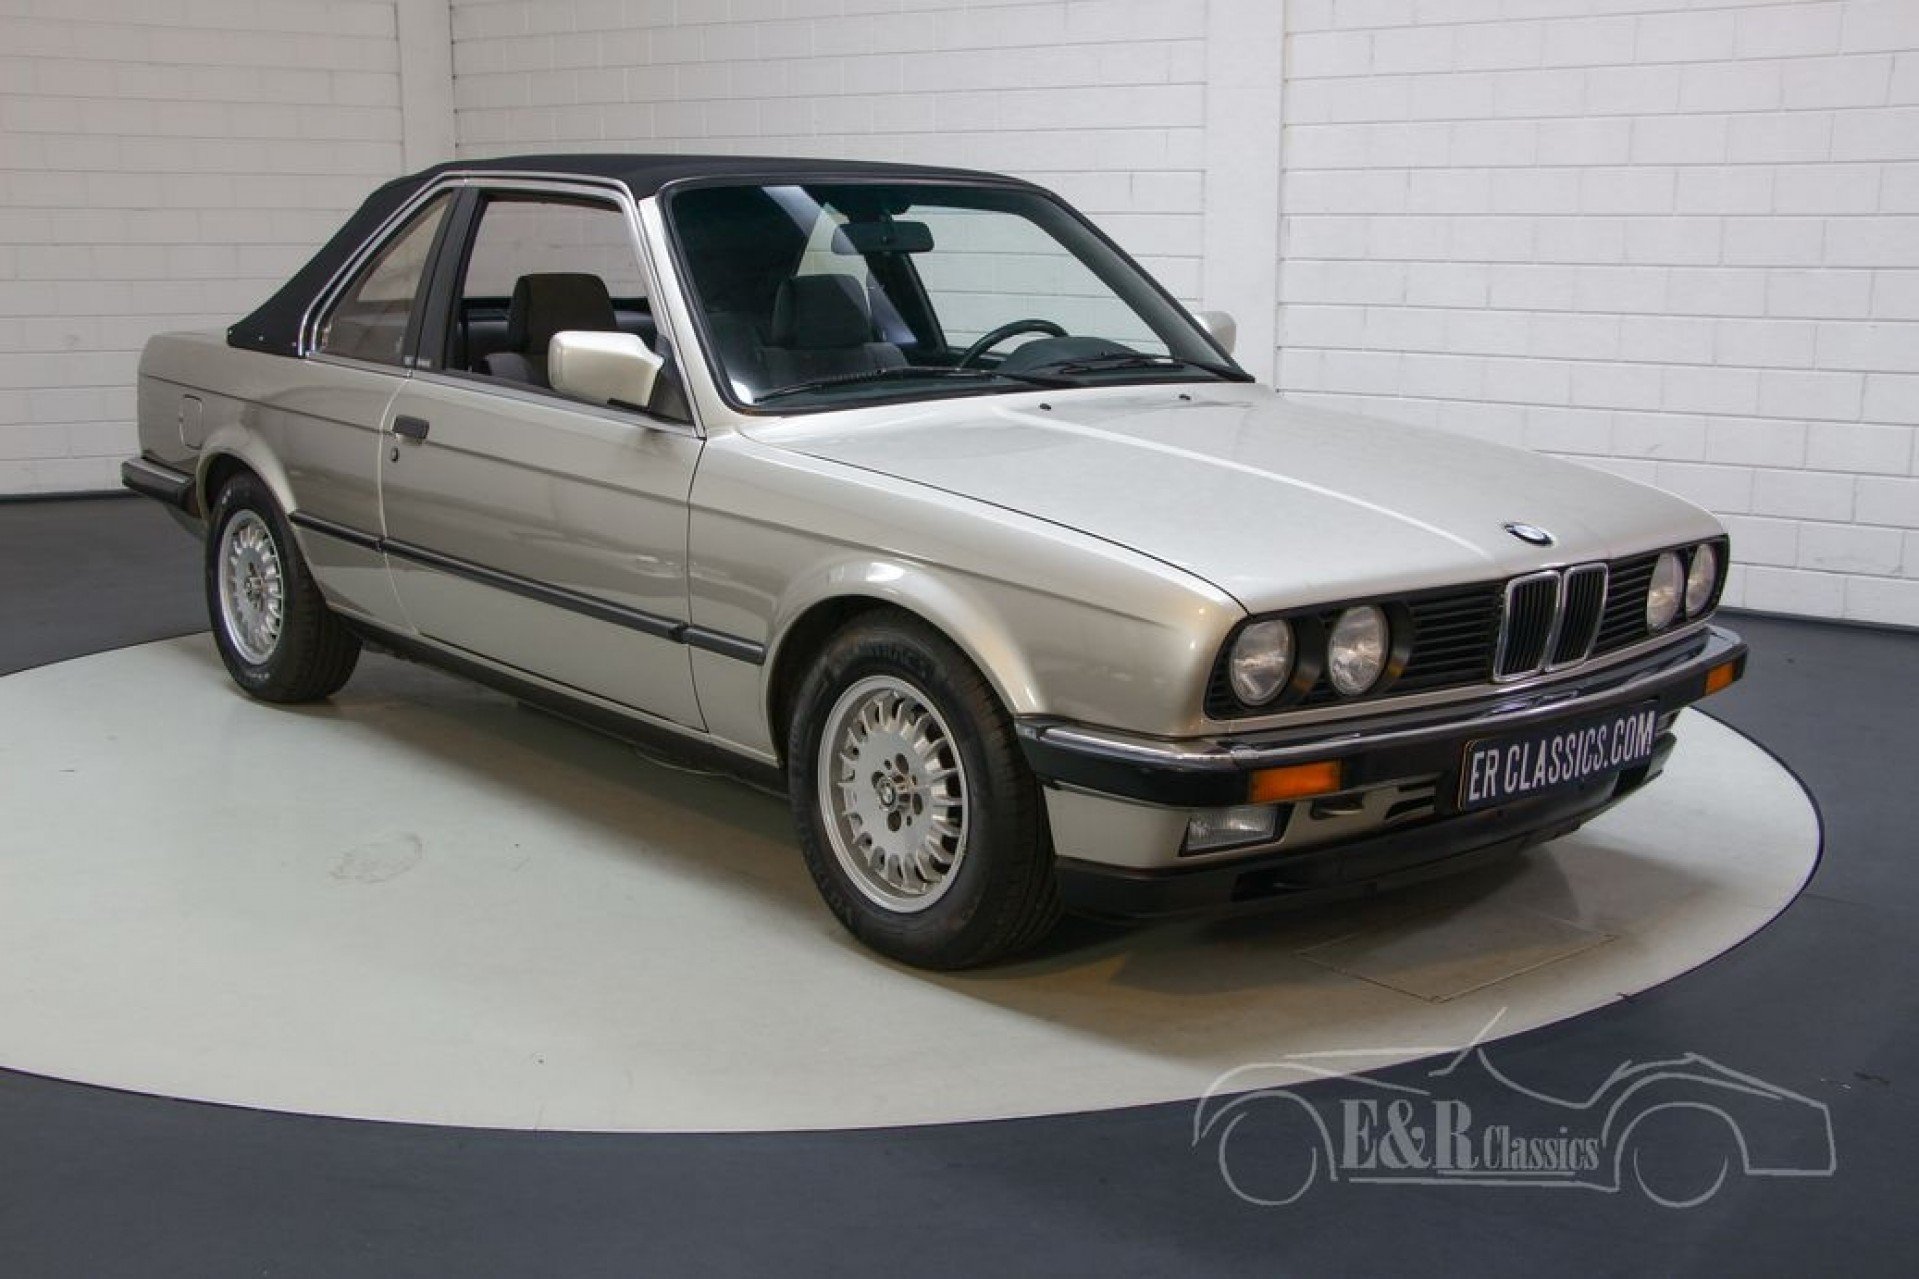 BMW 320 for sale at ERclassics